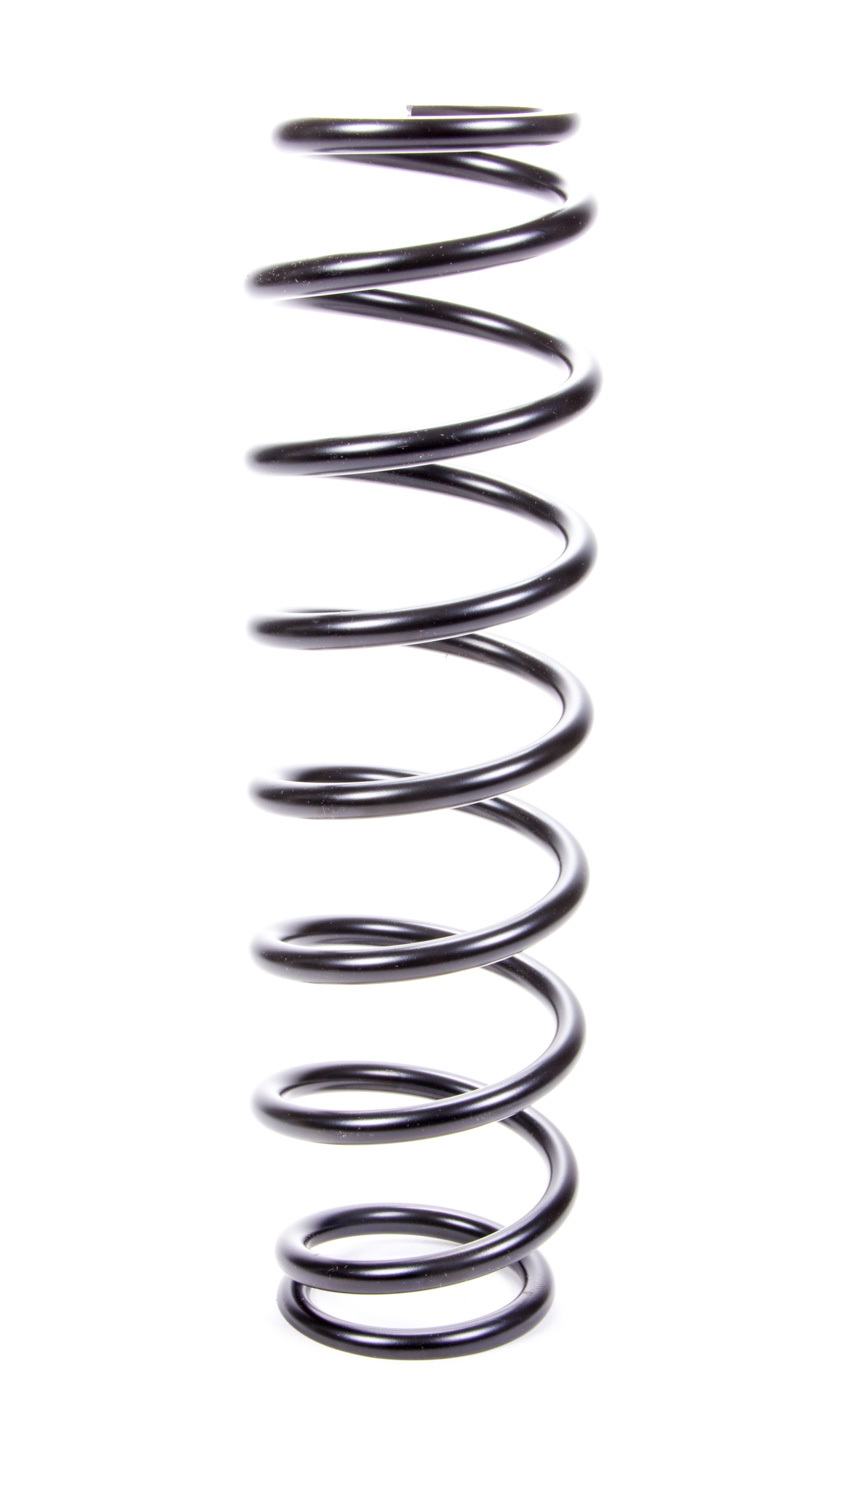 Swift Springs 140-250-300B Coil Spring, Barrel, Coil-Over, 2.500 in ID, 14.000 in Length, 300 lb/in Spring Rate, Steel, Black Powder Coat, Each